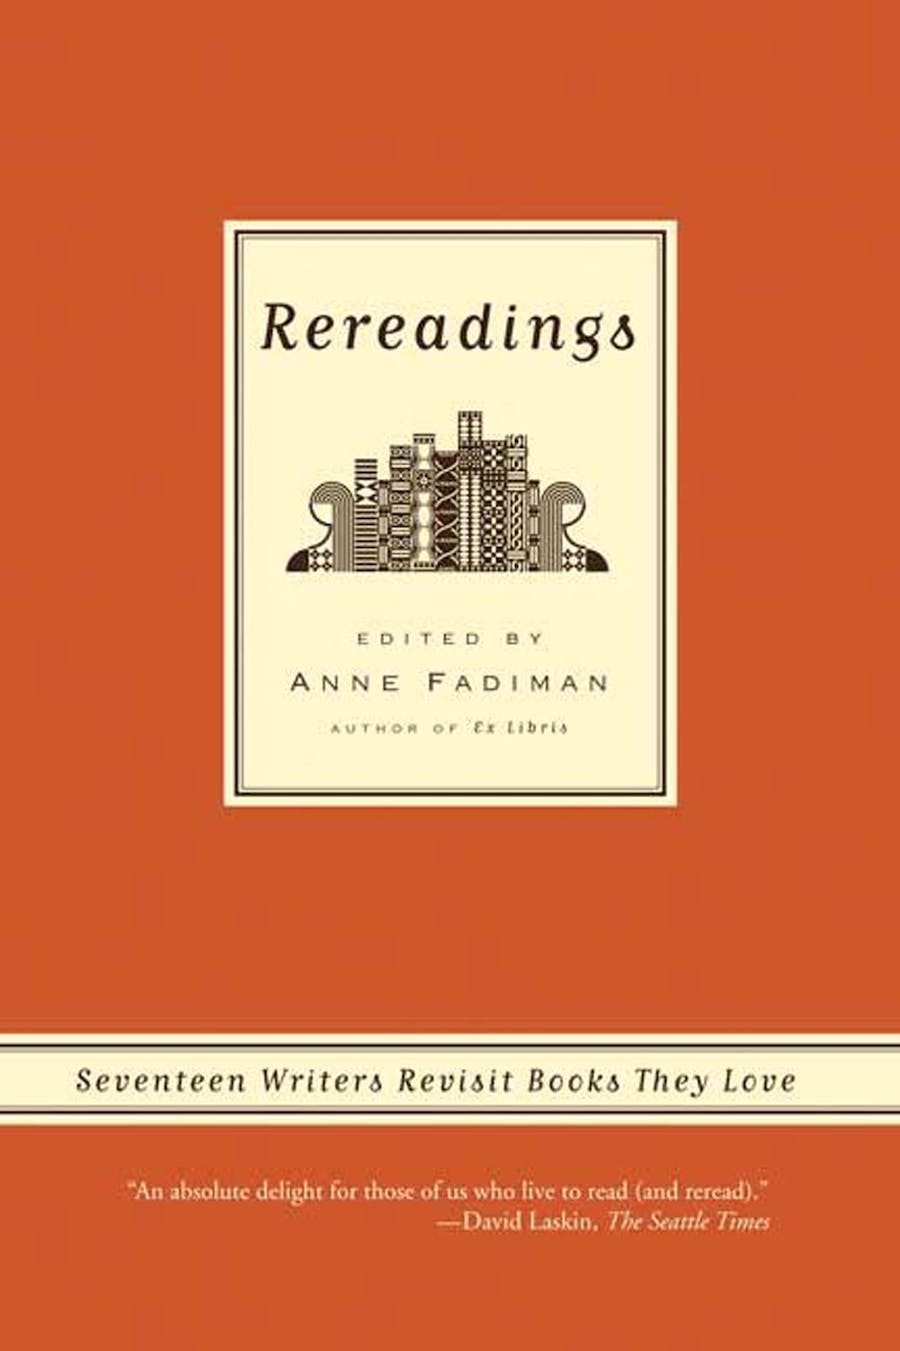 Rereadings: 17 Writers Revisit Books They Love, Edited by Anne Fadiman